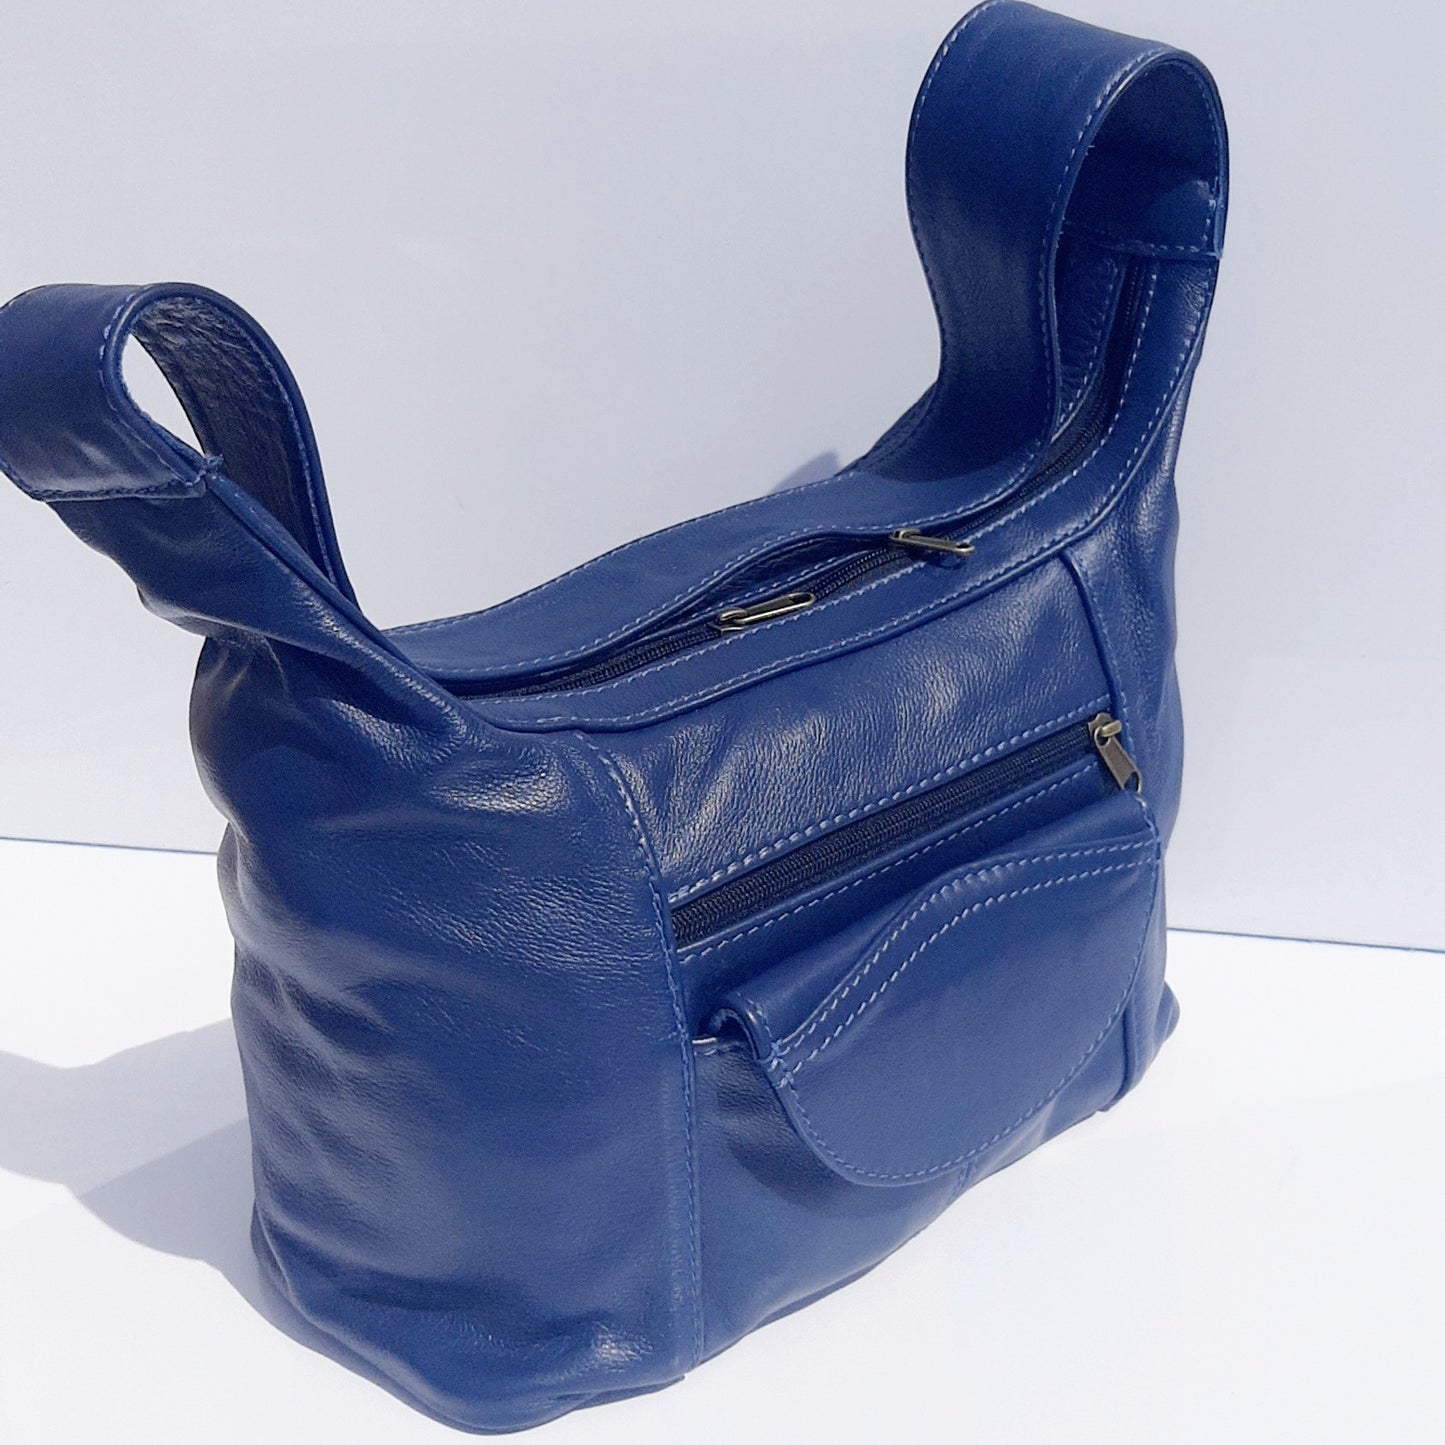 Gb7 leather bags with flap in Navy blue colour made by cape Masai Leather